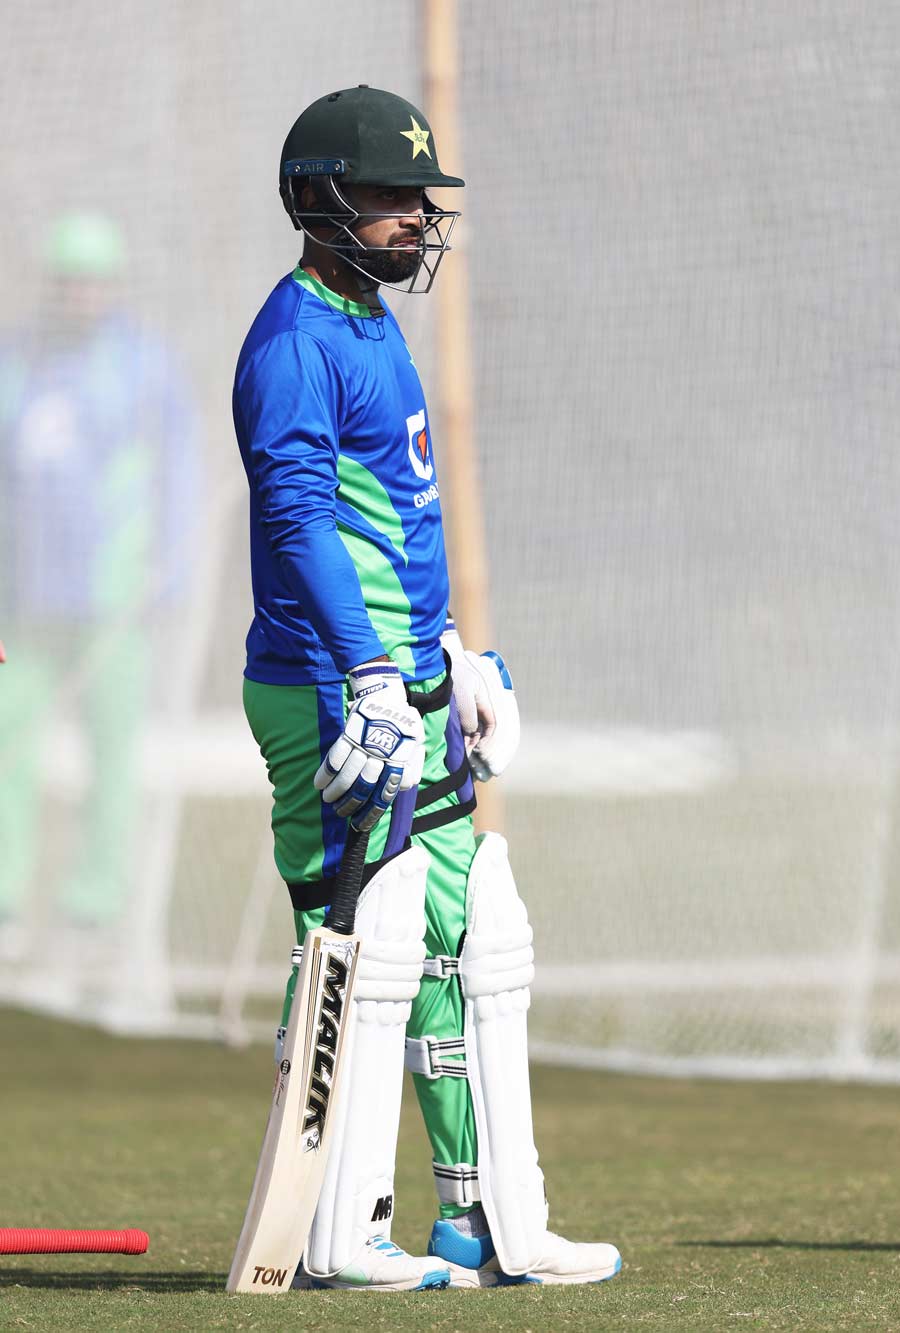 Abdullah Shafique (Pakistan): Touted to be the next big thing in Pakistani cricket by the likes of Ramiz Raja, Shafique adds a right-handed option to Pakistan’s opening combination that has been all left-handers for quite some time. He may not be in the XI at the start of the tournament, but the 23-year-old’s inclination to hit sixes makes him a tempting option for Pakistan. With just four ODI matches under his belt, Shafique is yet to show his promise in this format. But just like so many Pakistani batters before, it might just take the World Cup for Shafique to well and truly arrive